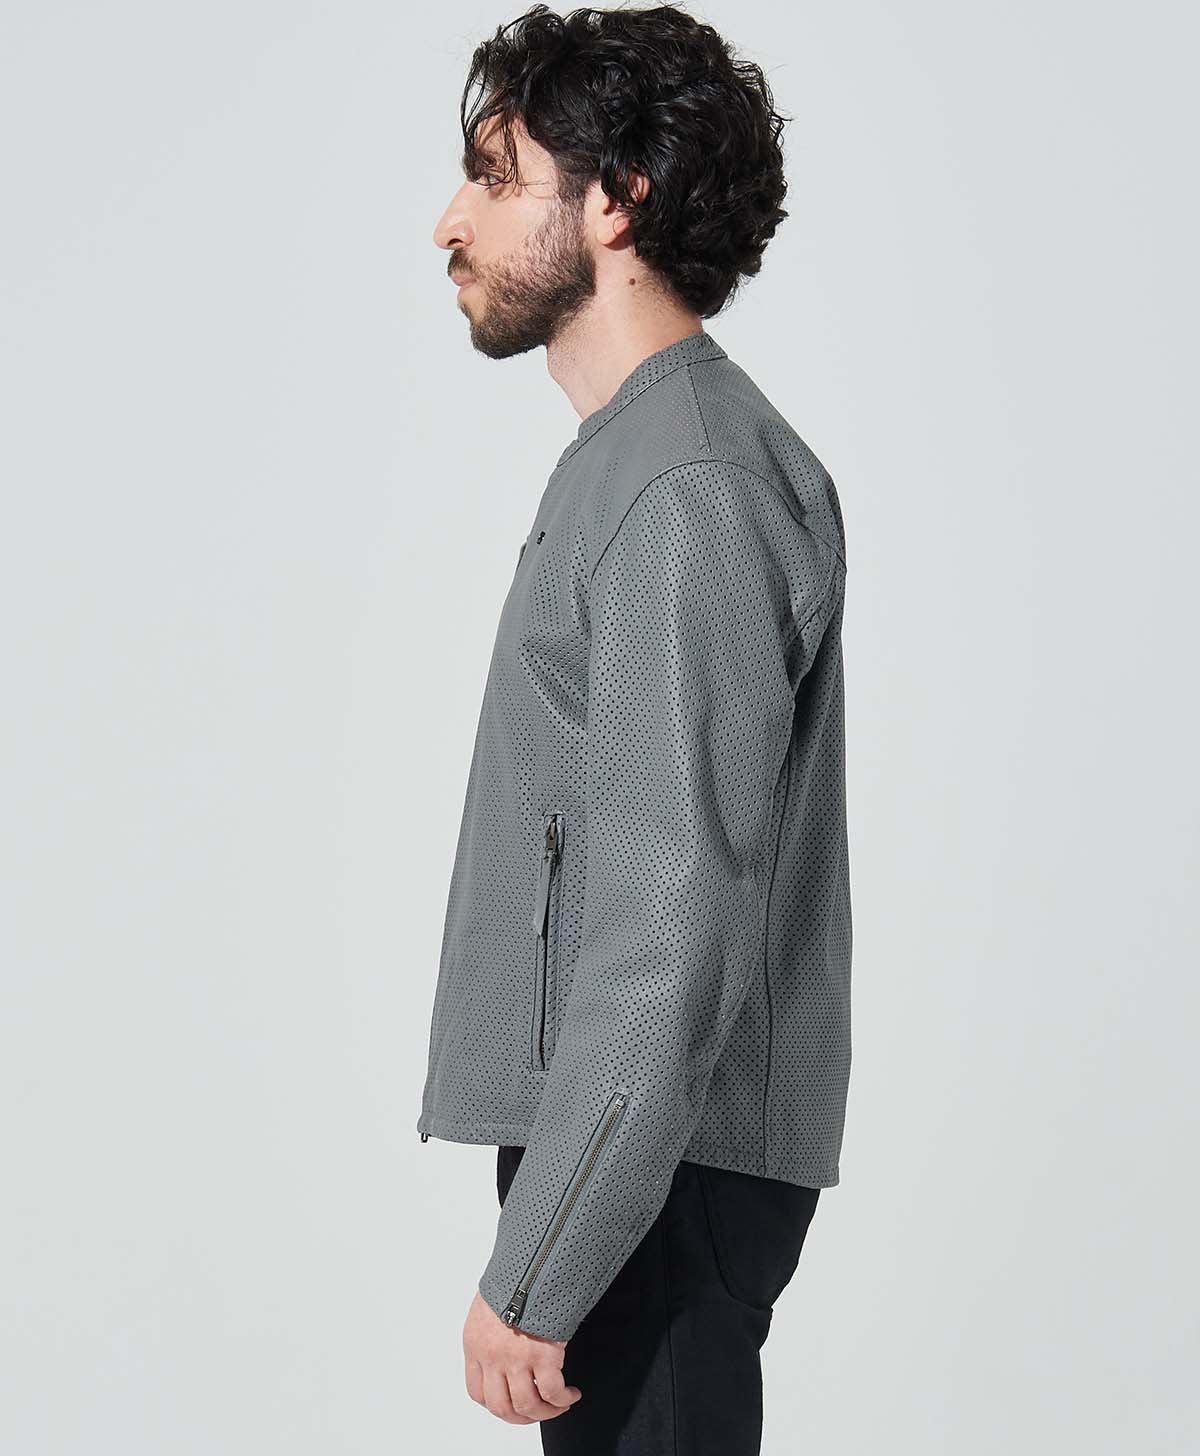 PL-SW SS / Gray (direct store limited item)